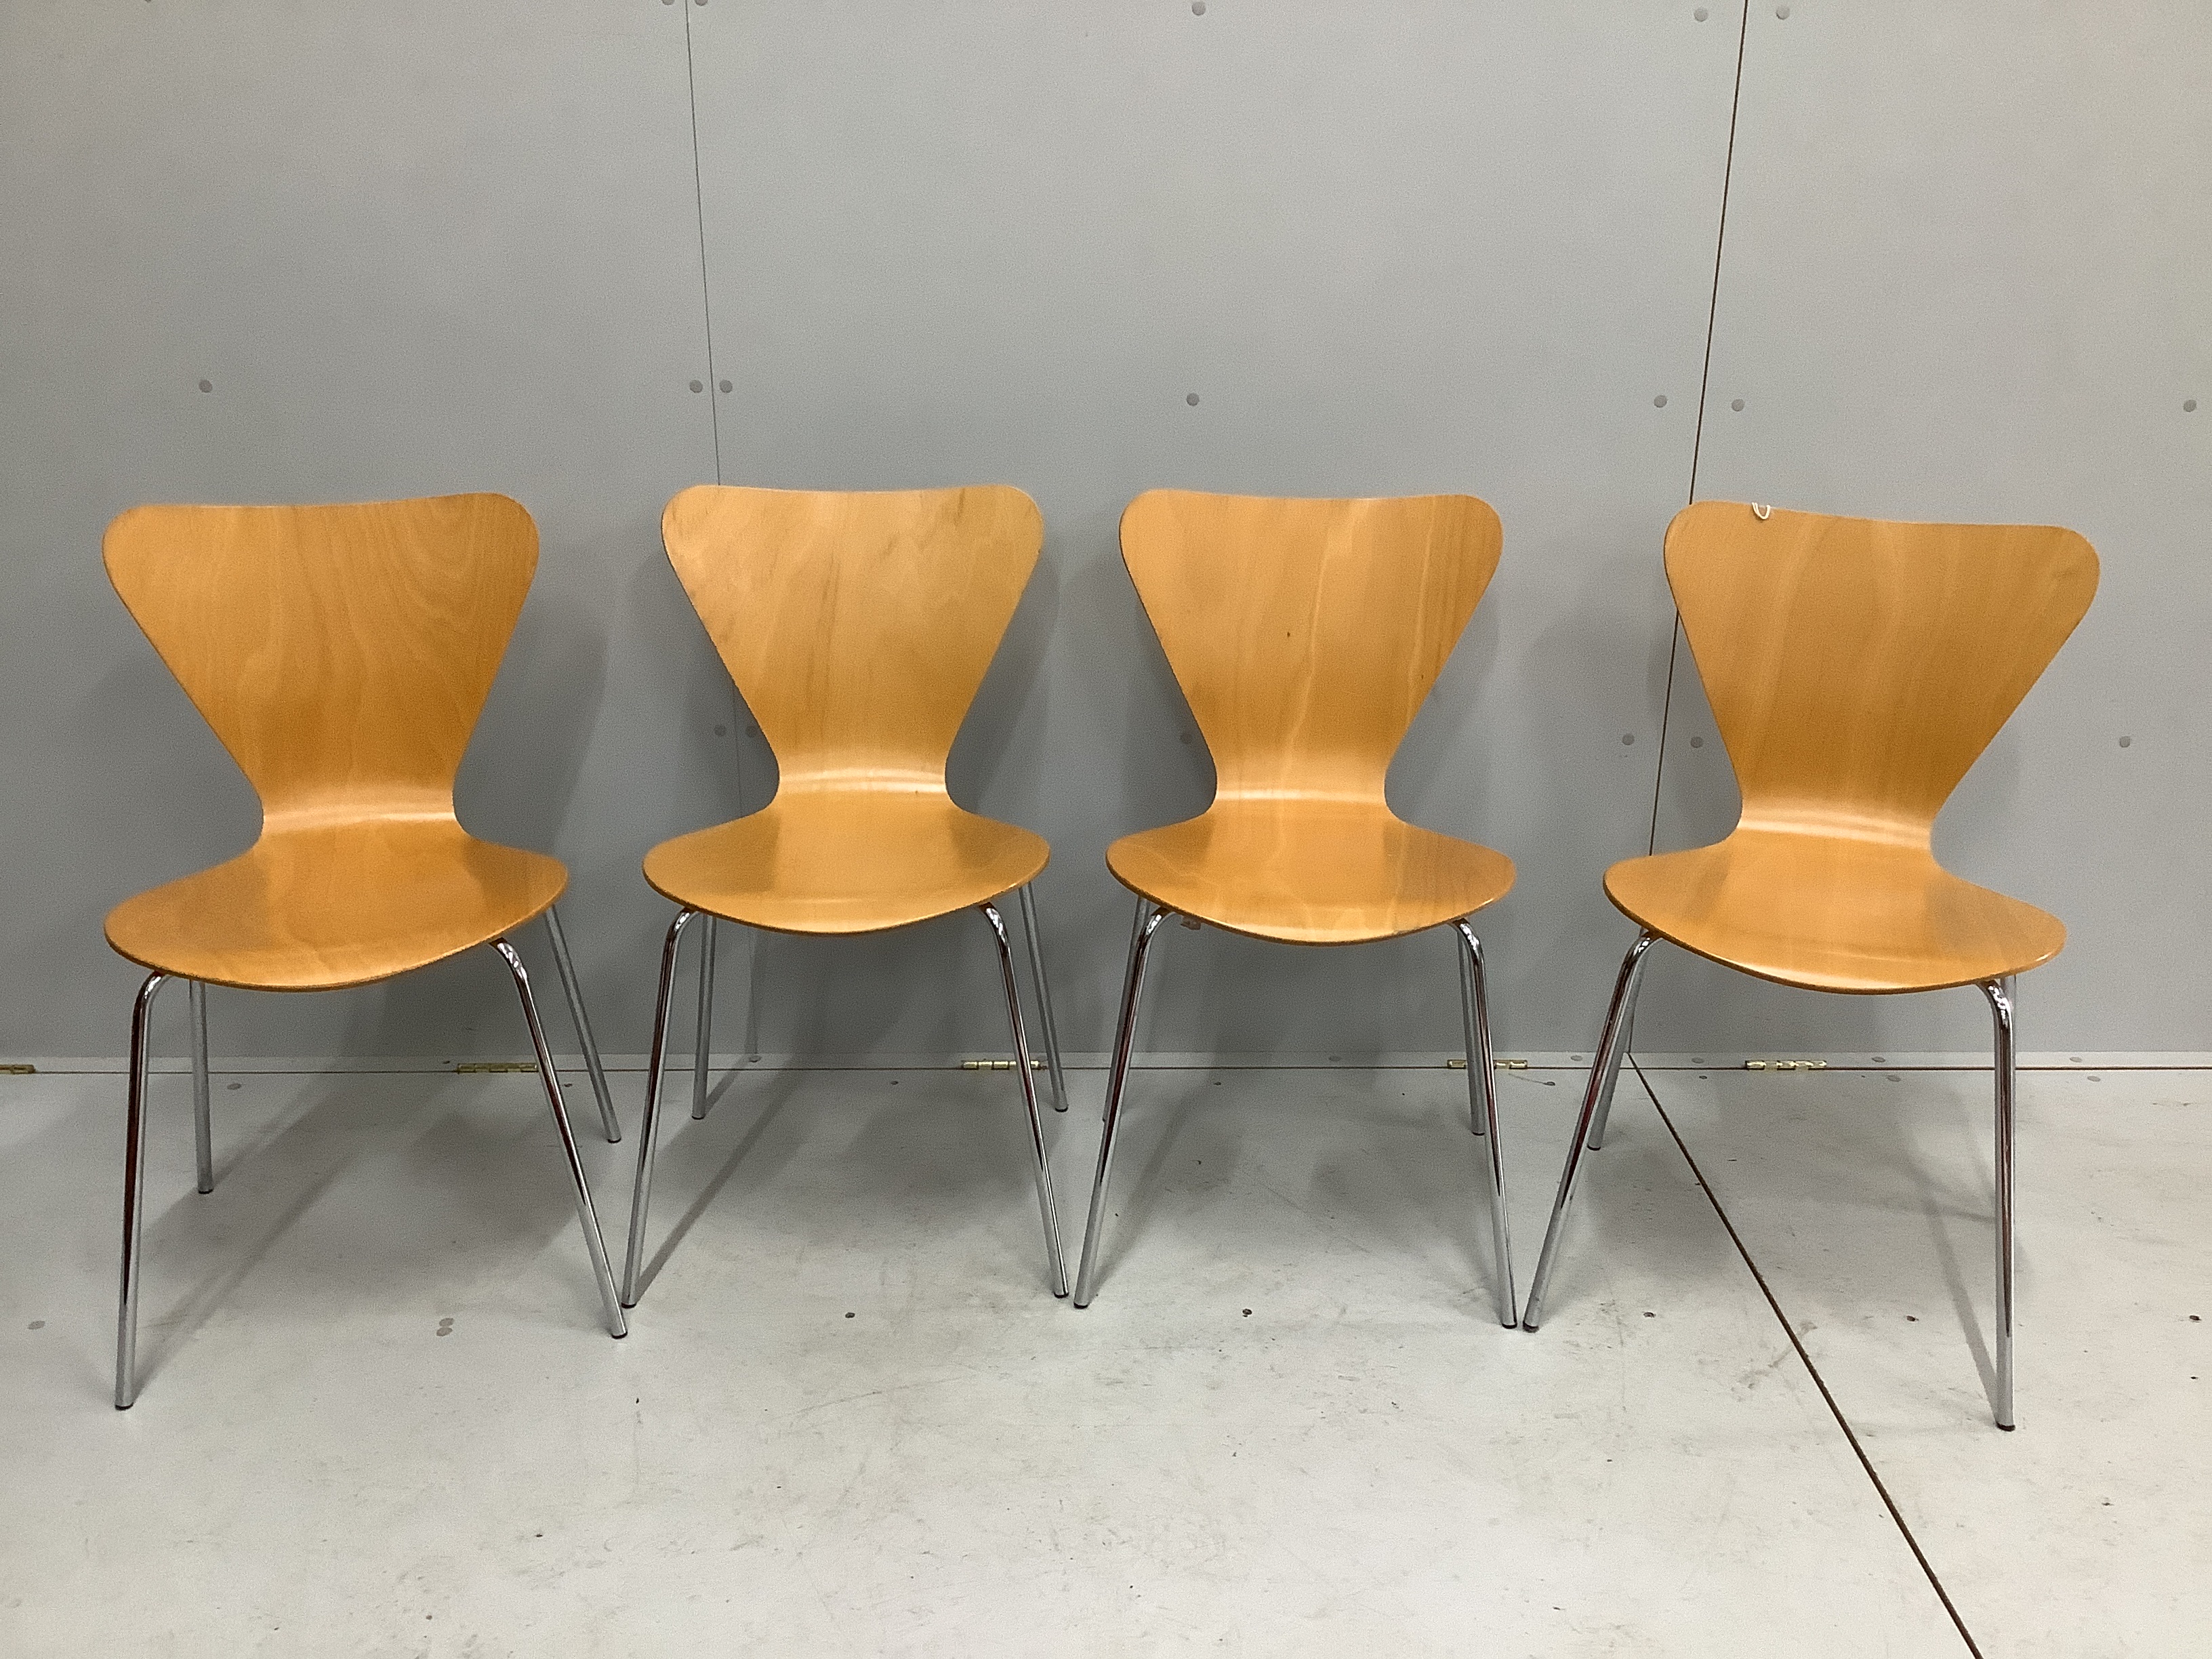 A set of four Arne Jacobsen style bent ply and chrome chairs, width 45cm, depth 40cm, height 80cm